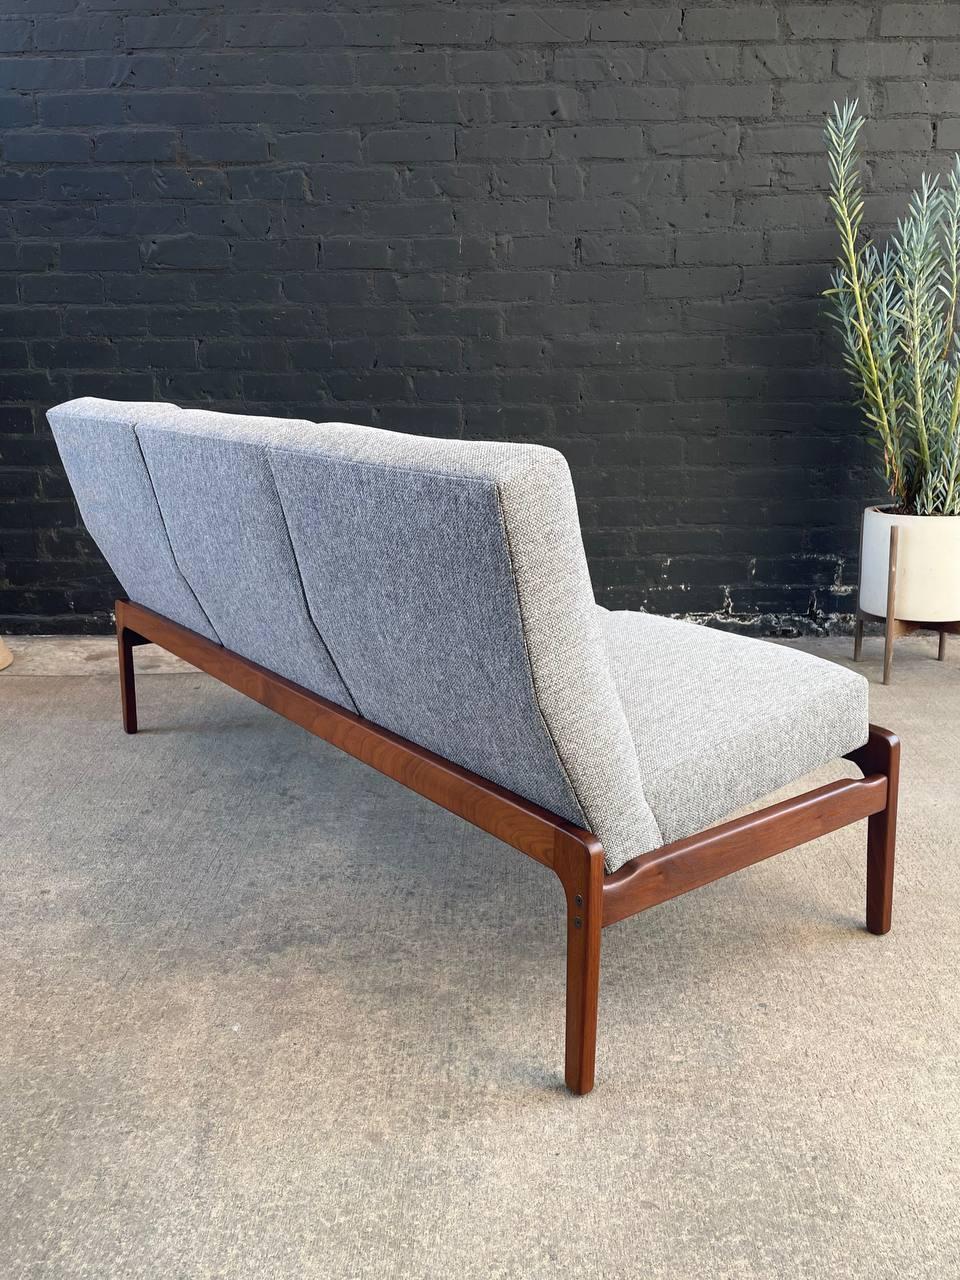 Newly Refinished - Mid-Century Modern Sculpted Walnut & New Tweed Fabric Sofa In Excellent Condition For Sale In Los Angeles, CA